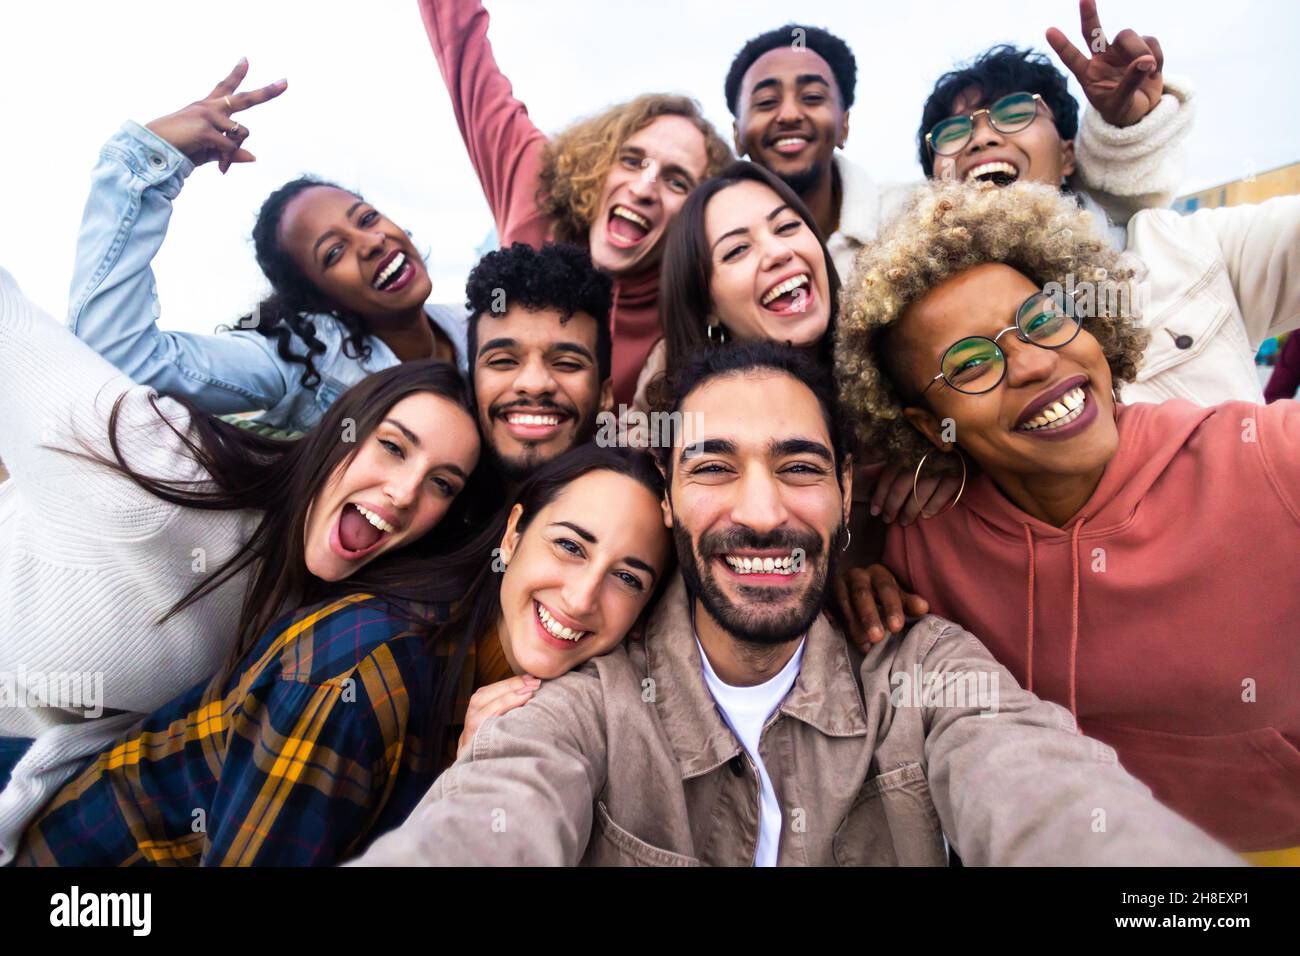 Big group portrait of diverse young people together outdoors Stock Photo